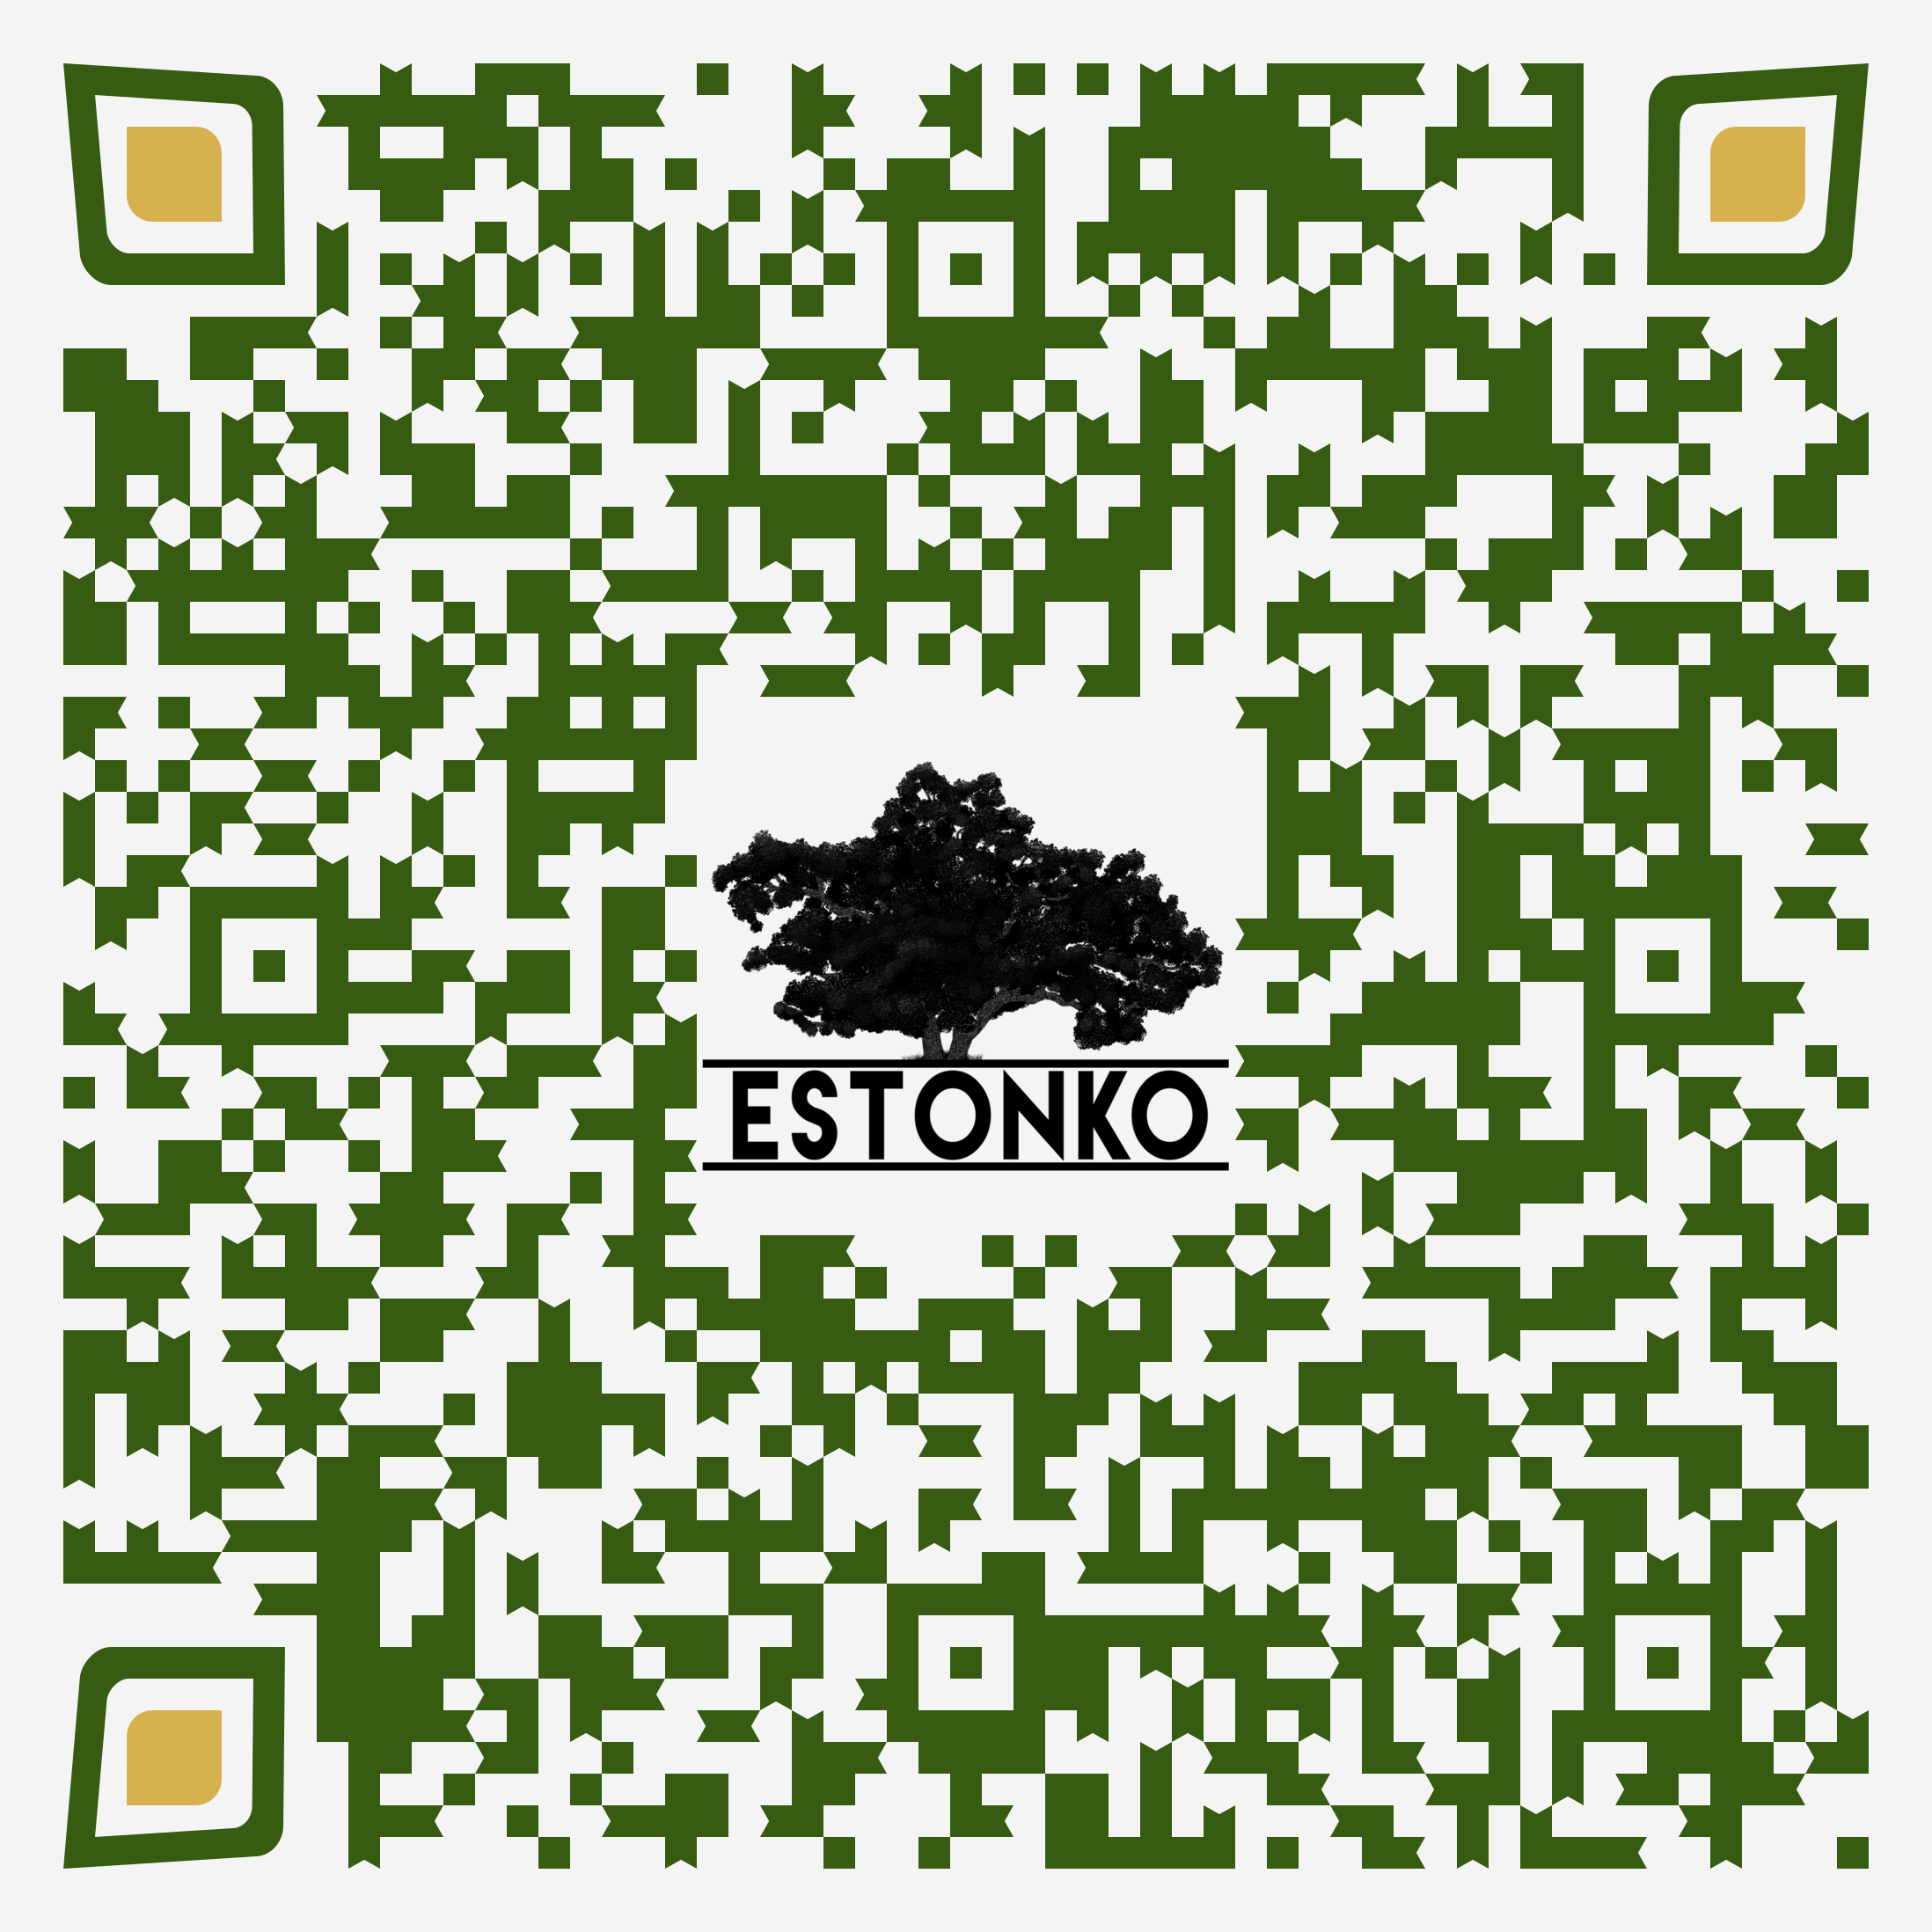 QR code featuring the logo for Estonko, which opens an Instagram story template for the program.